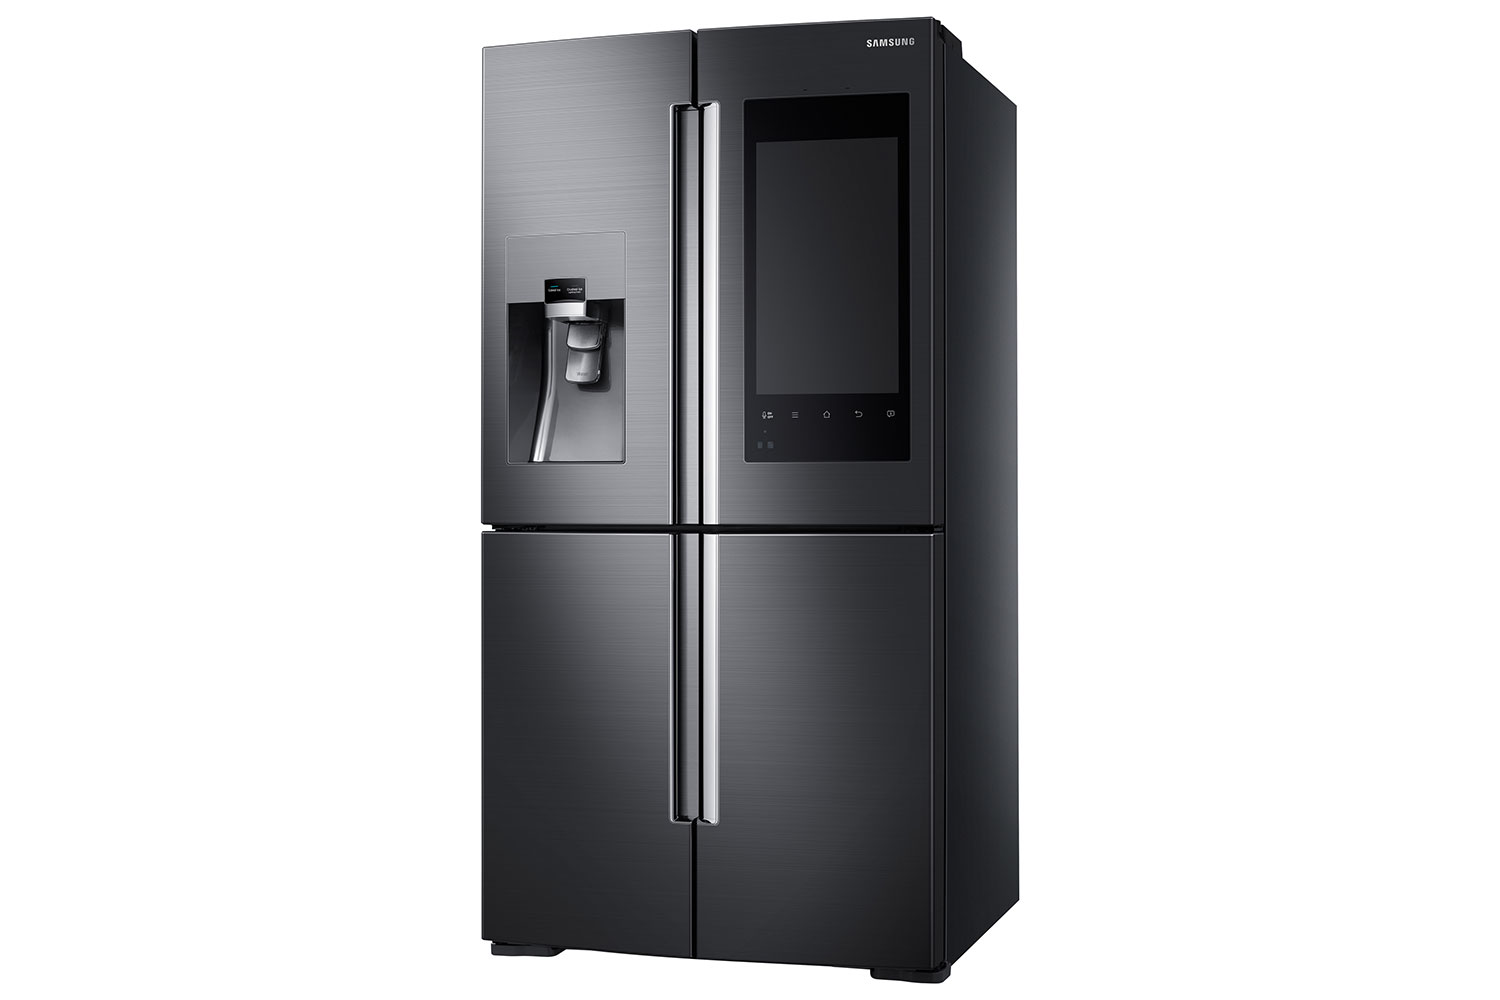 samsung introduces addwash mid control and smart features as ces 2015 rf9500k 005 r perspective black